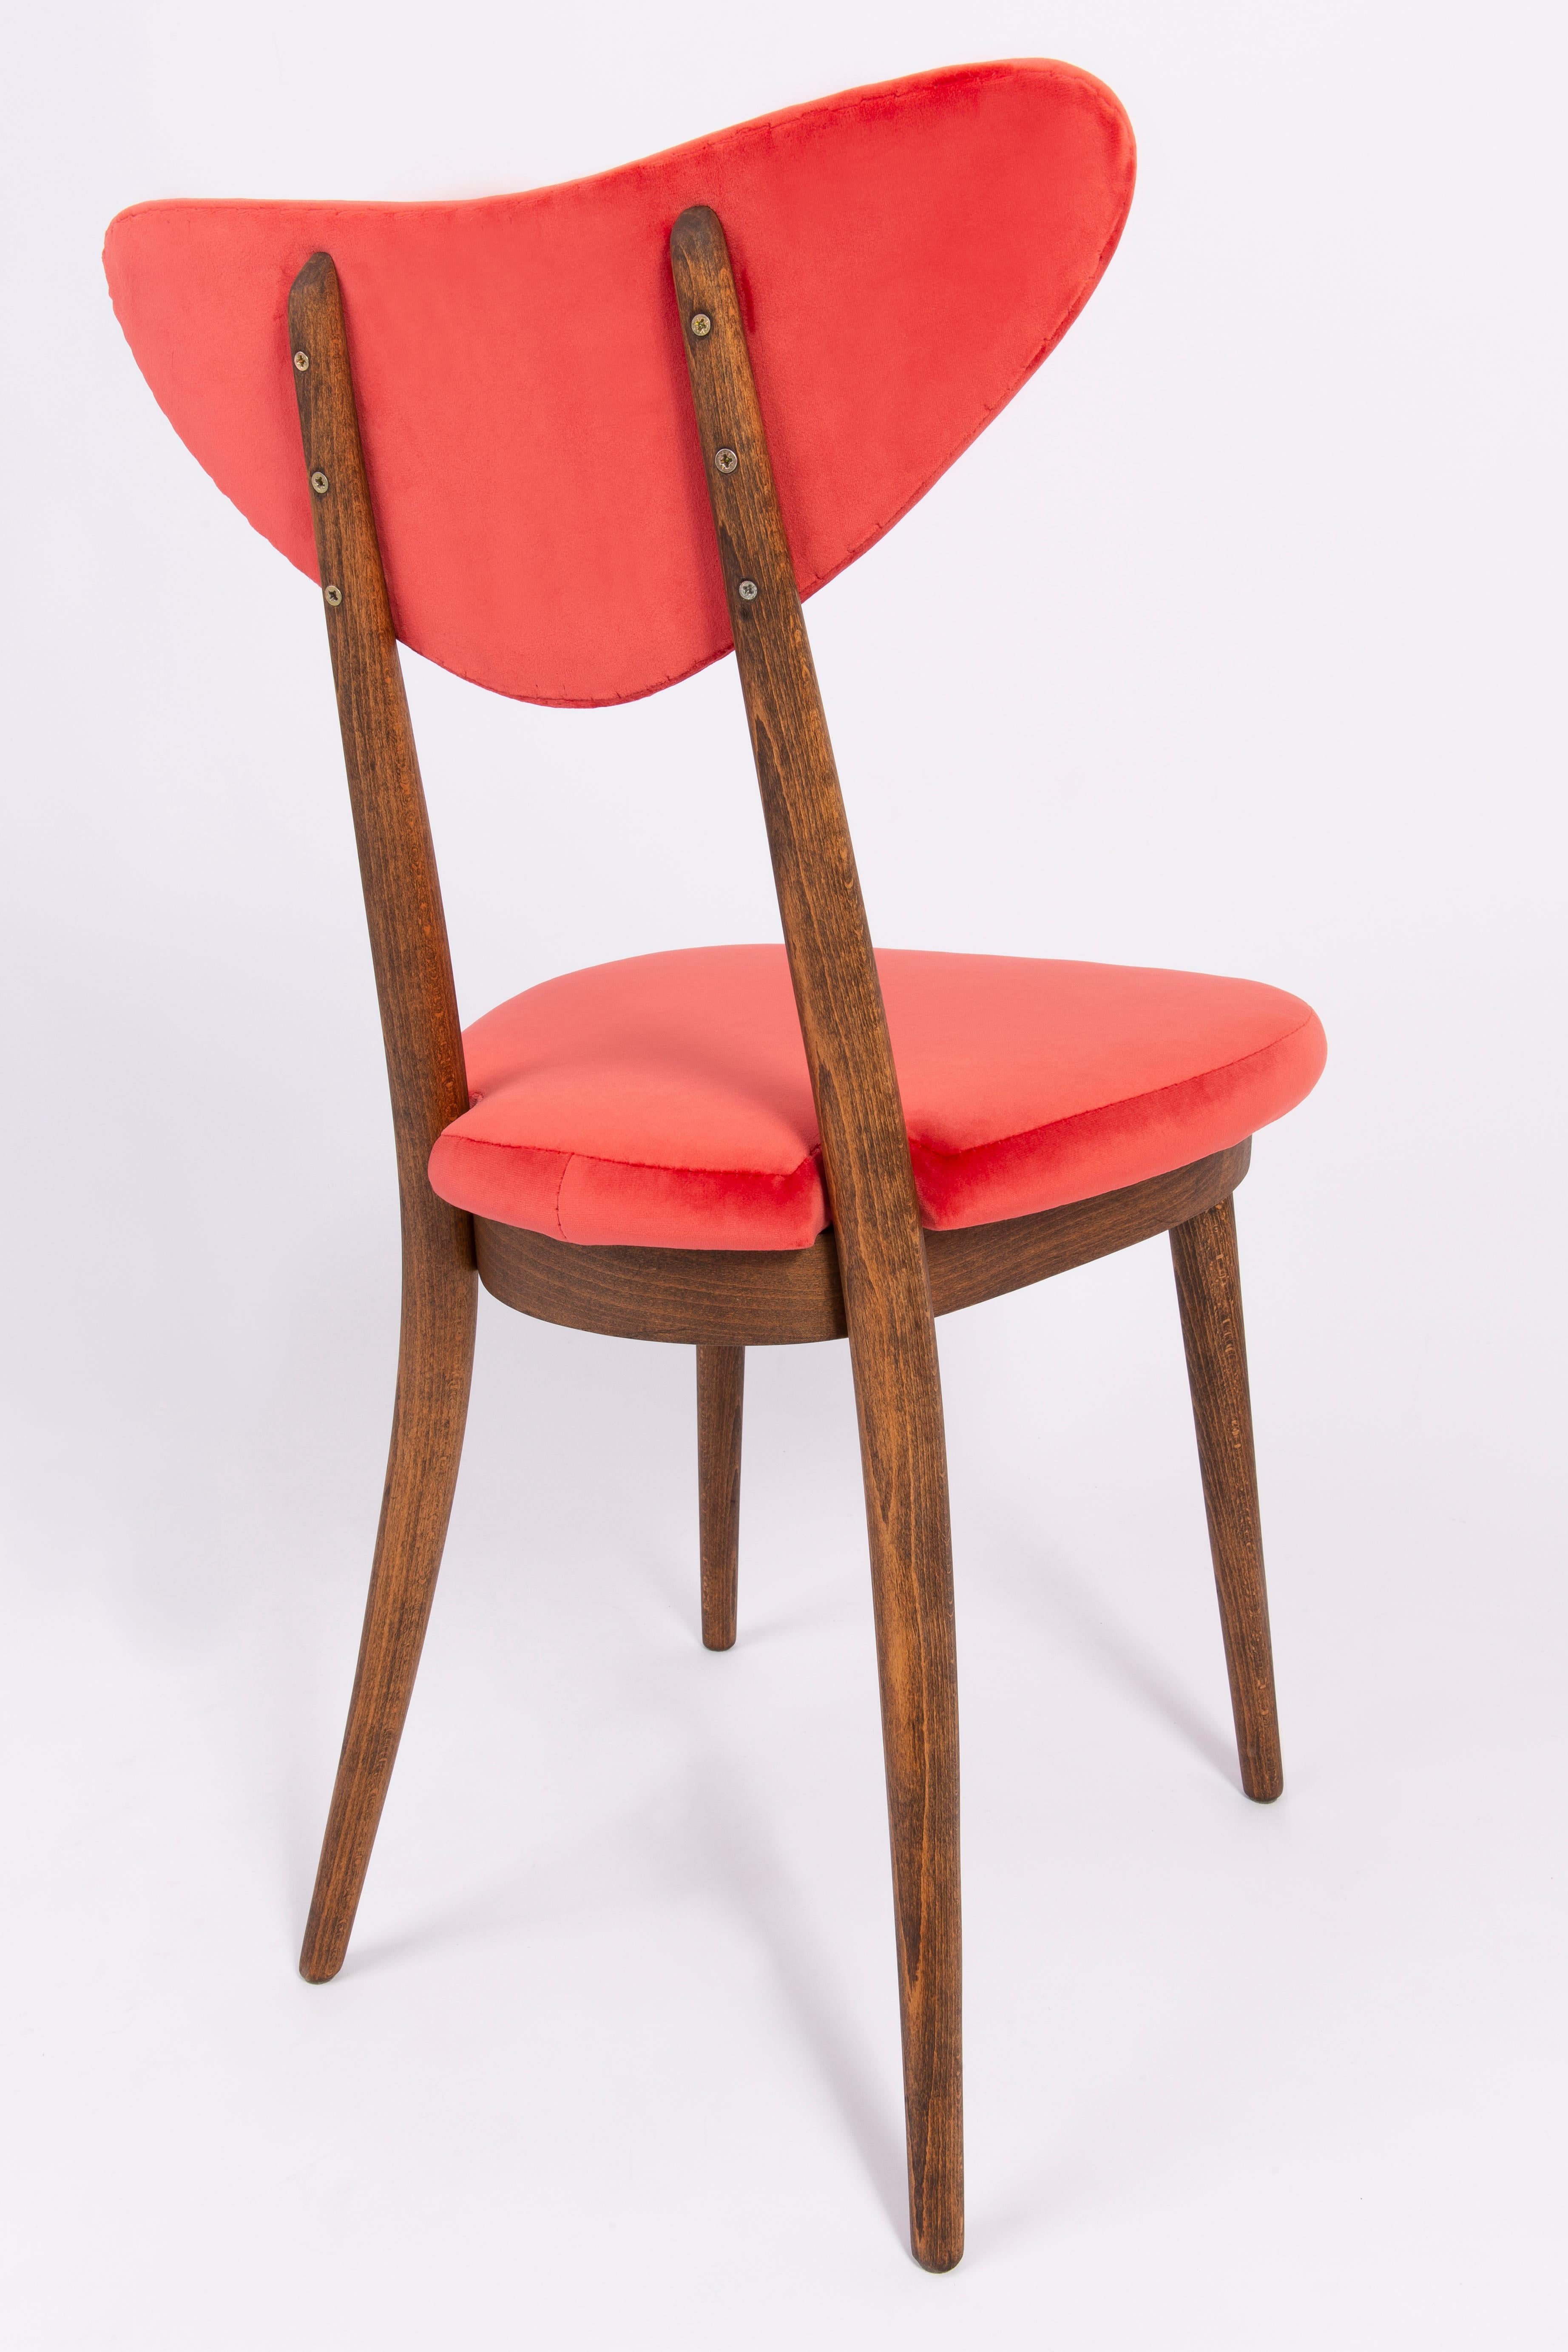 Pair of Red Heart Chairs, Poland, 1960s For Sale 2